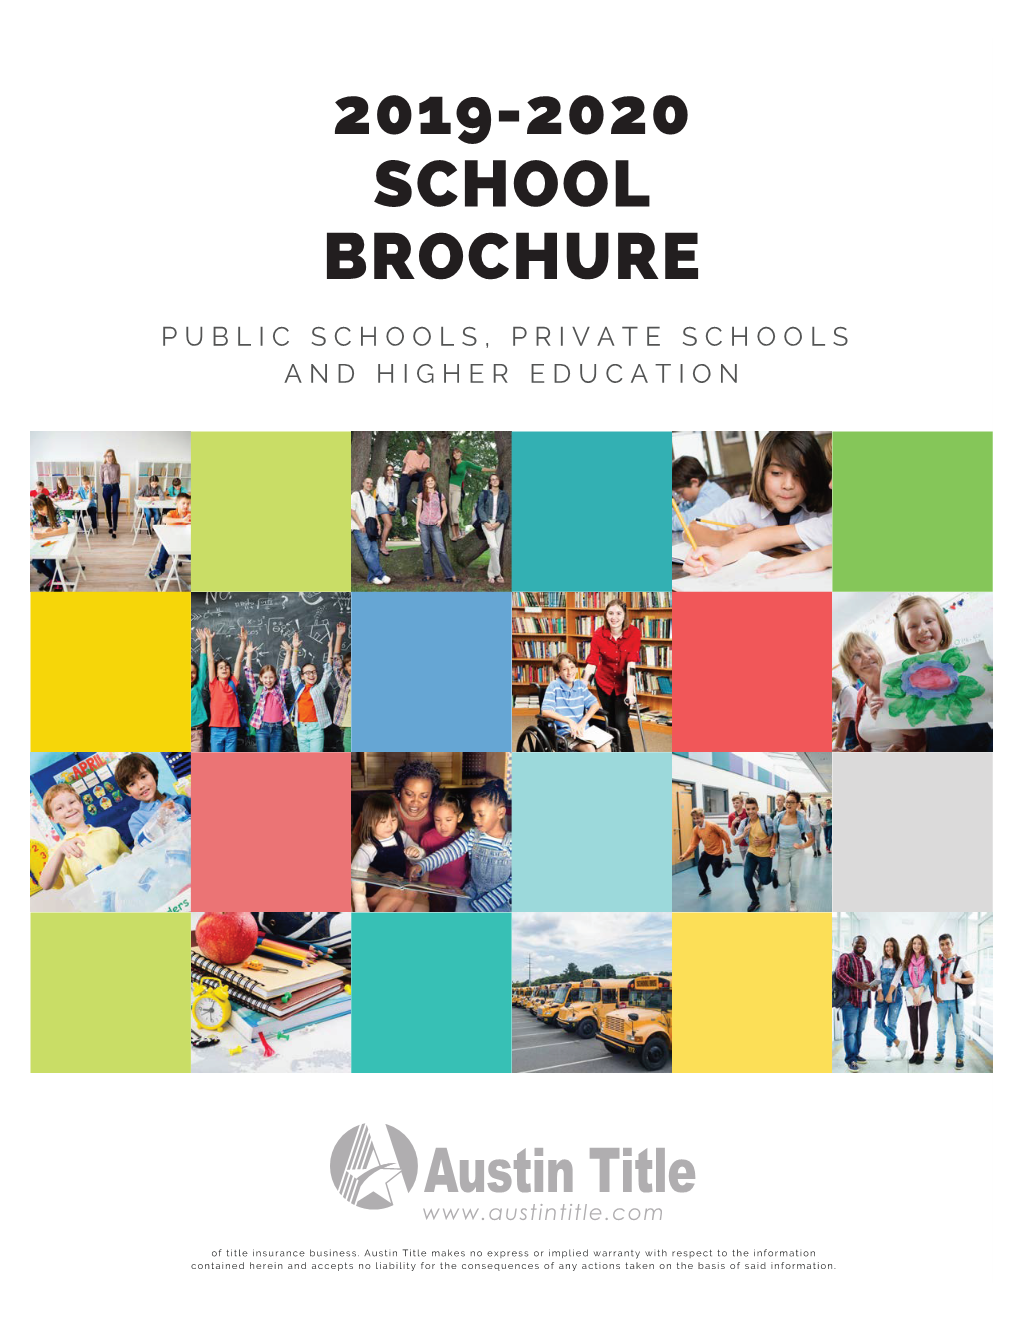 Public and Private Schools by Austin